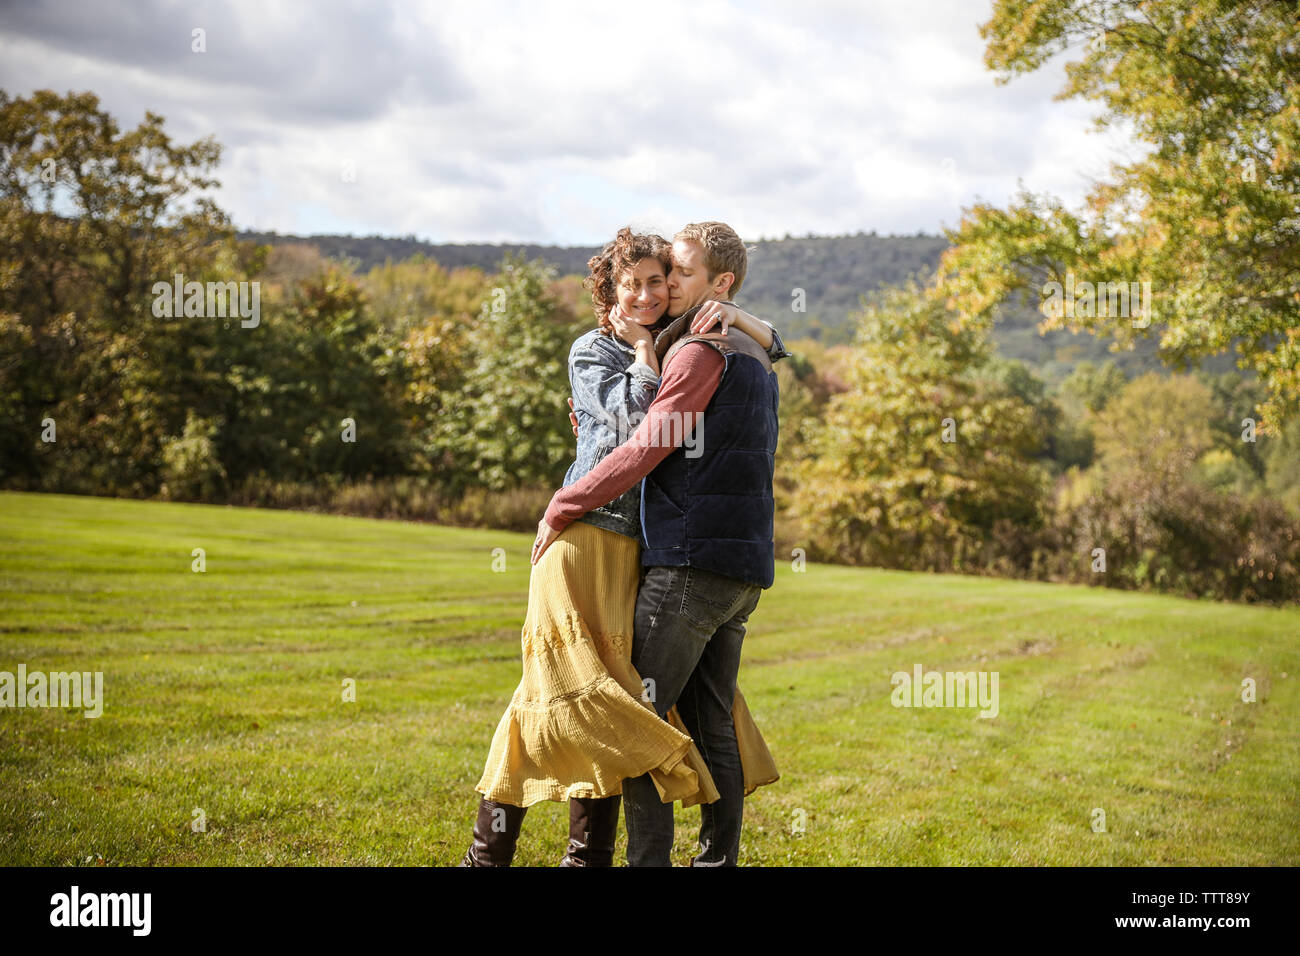 couple embracing together smiling with windblown hair in field Stock Photo